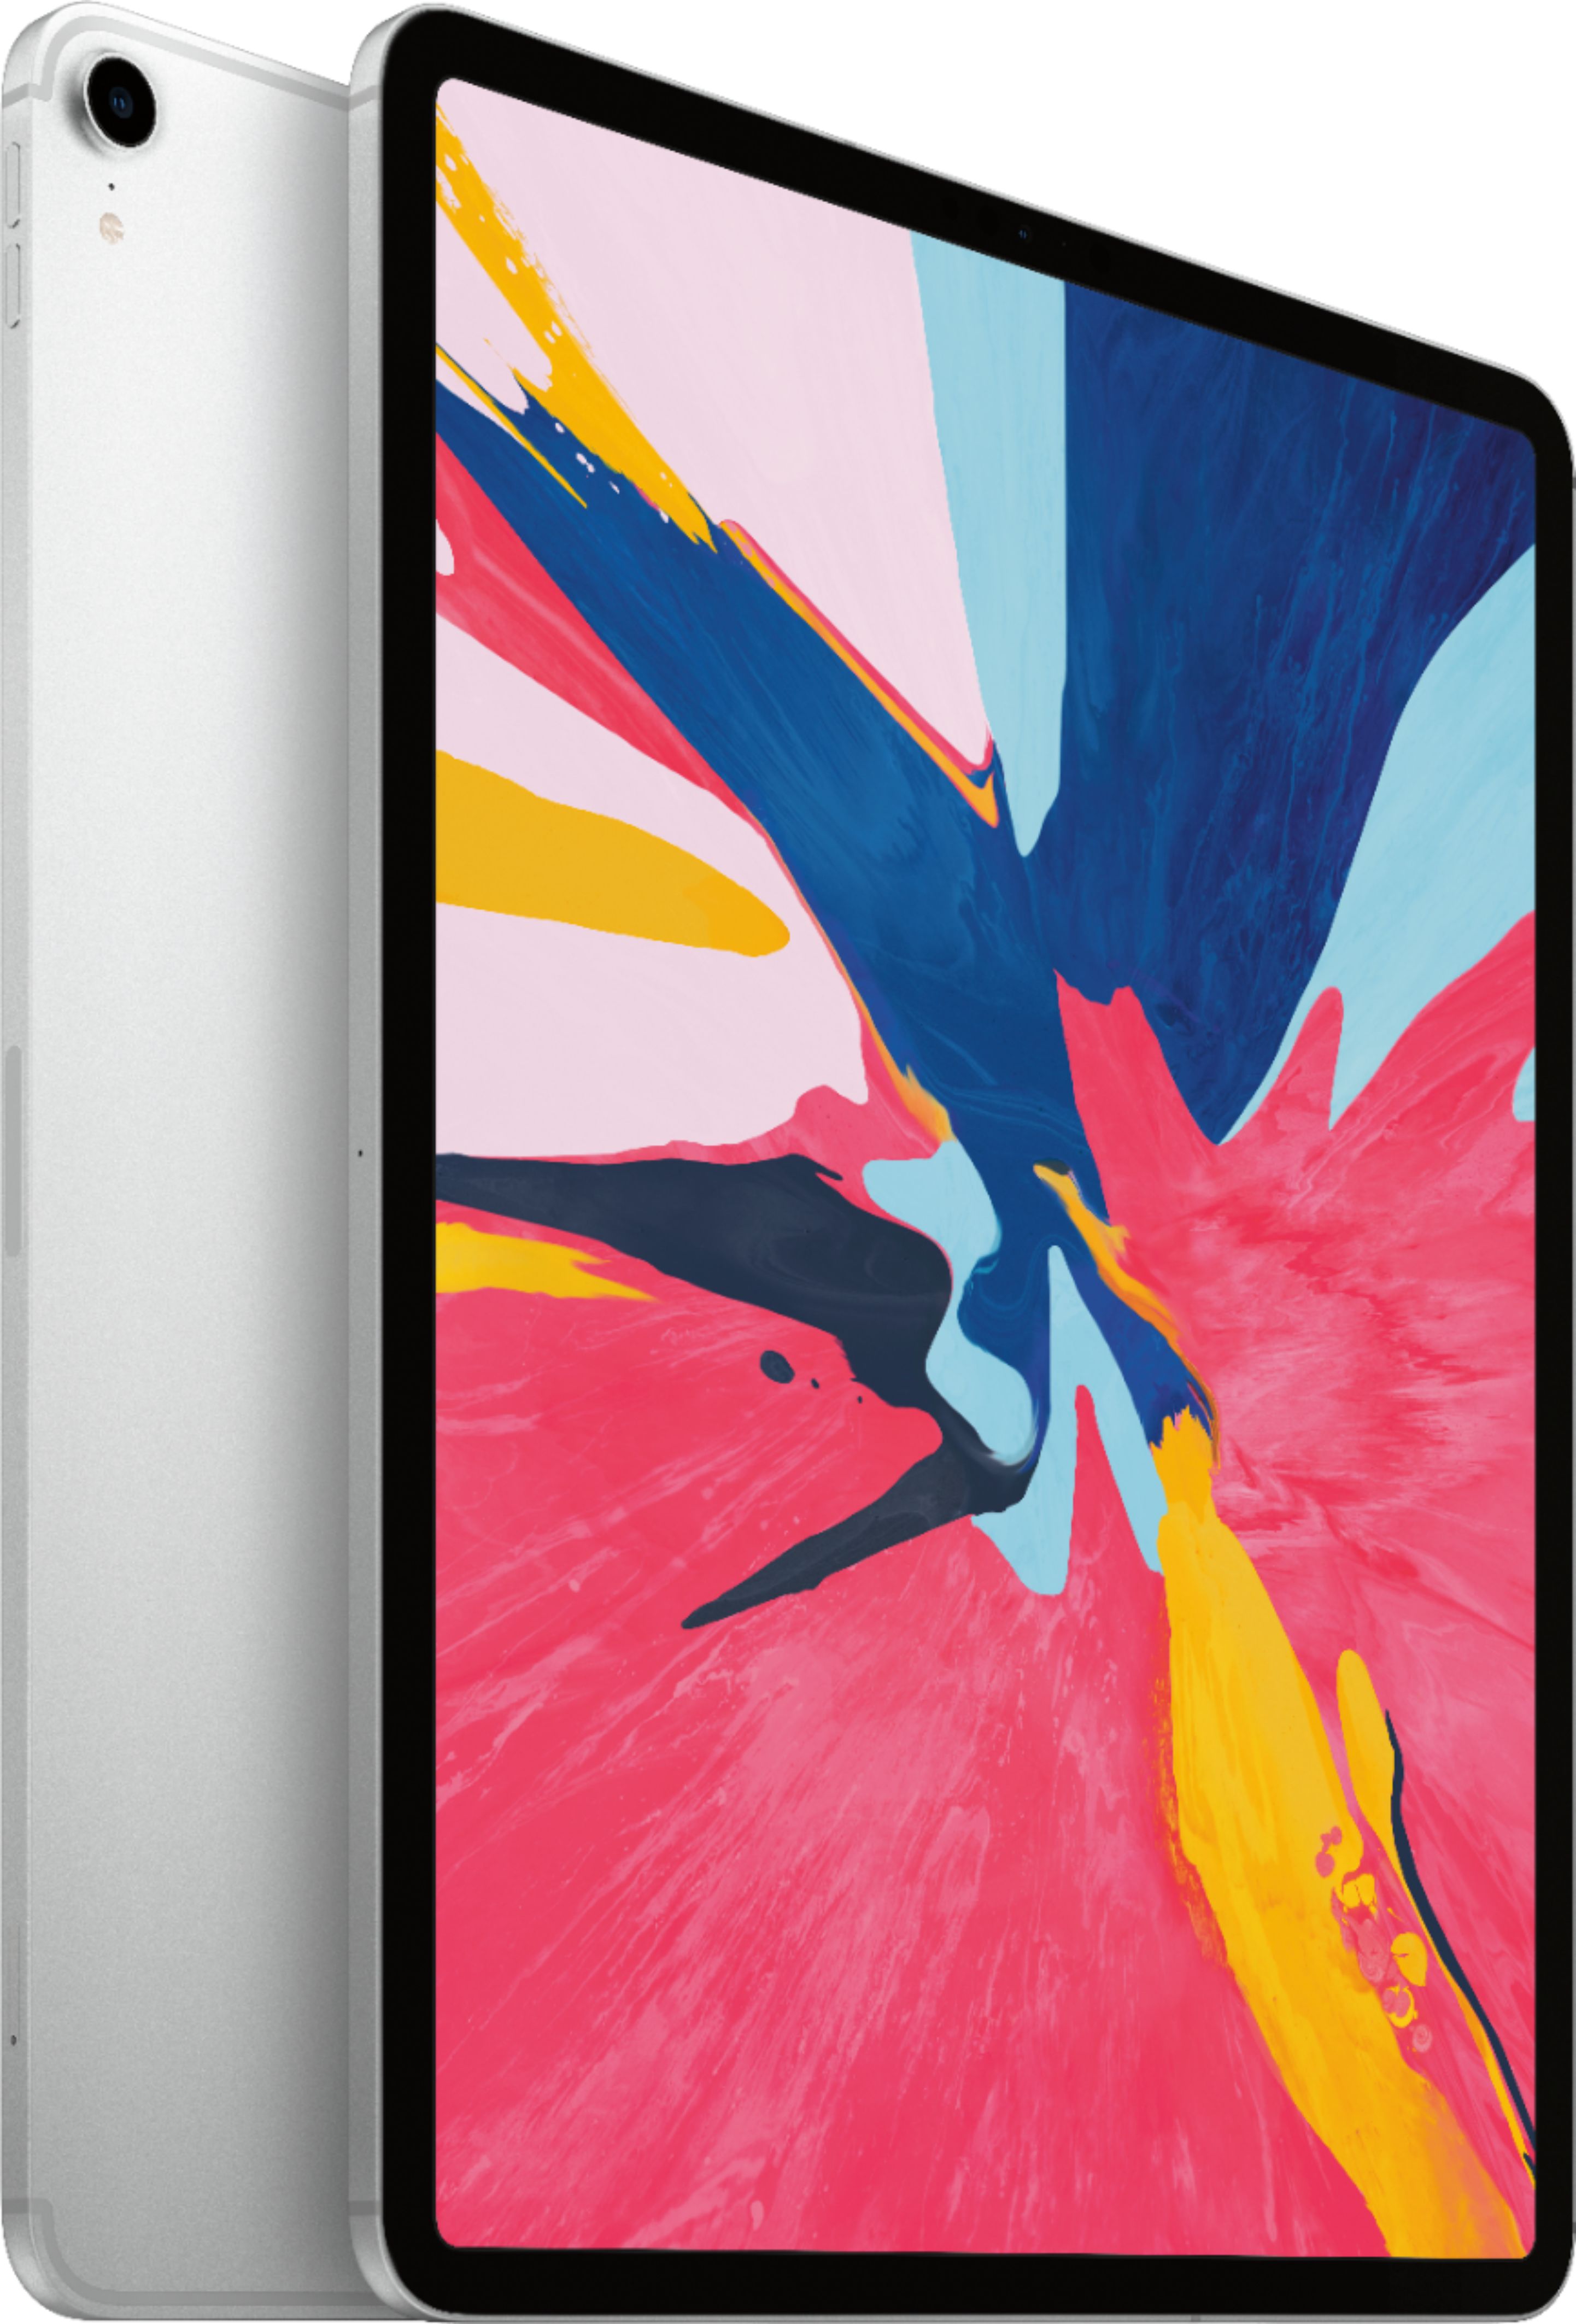 Angle View: Apple - 12.9-Inch iPad Pro (4th Generation) with Wi-Fi + Cellular - 256GB (Unlocked) - Silver